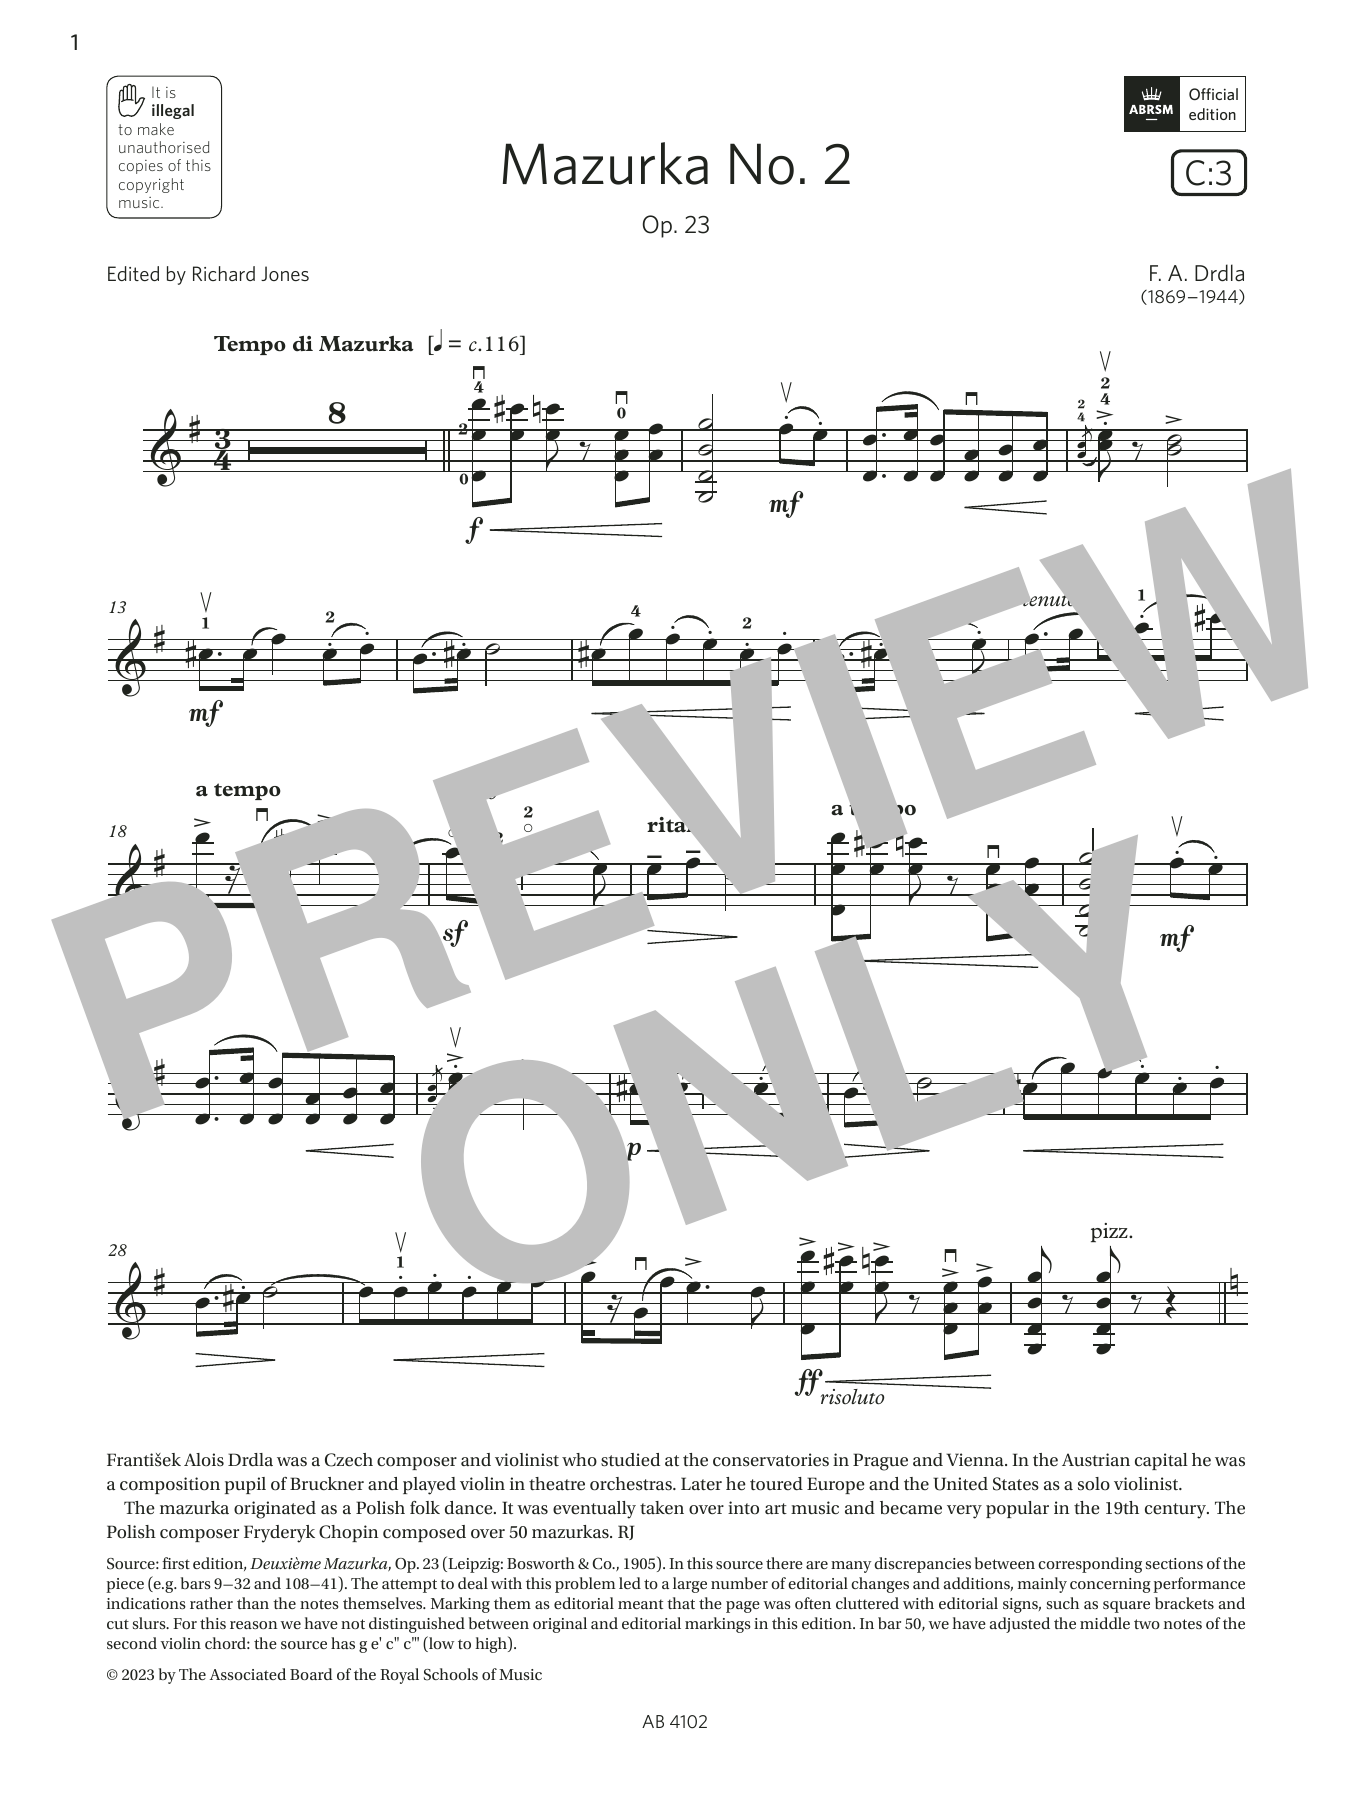 Download F. A. Drdla Mazurka No. 2 (Grade 8, C3, from the AB Sheet Music